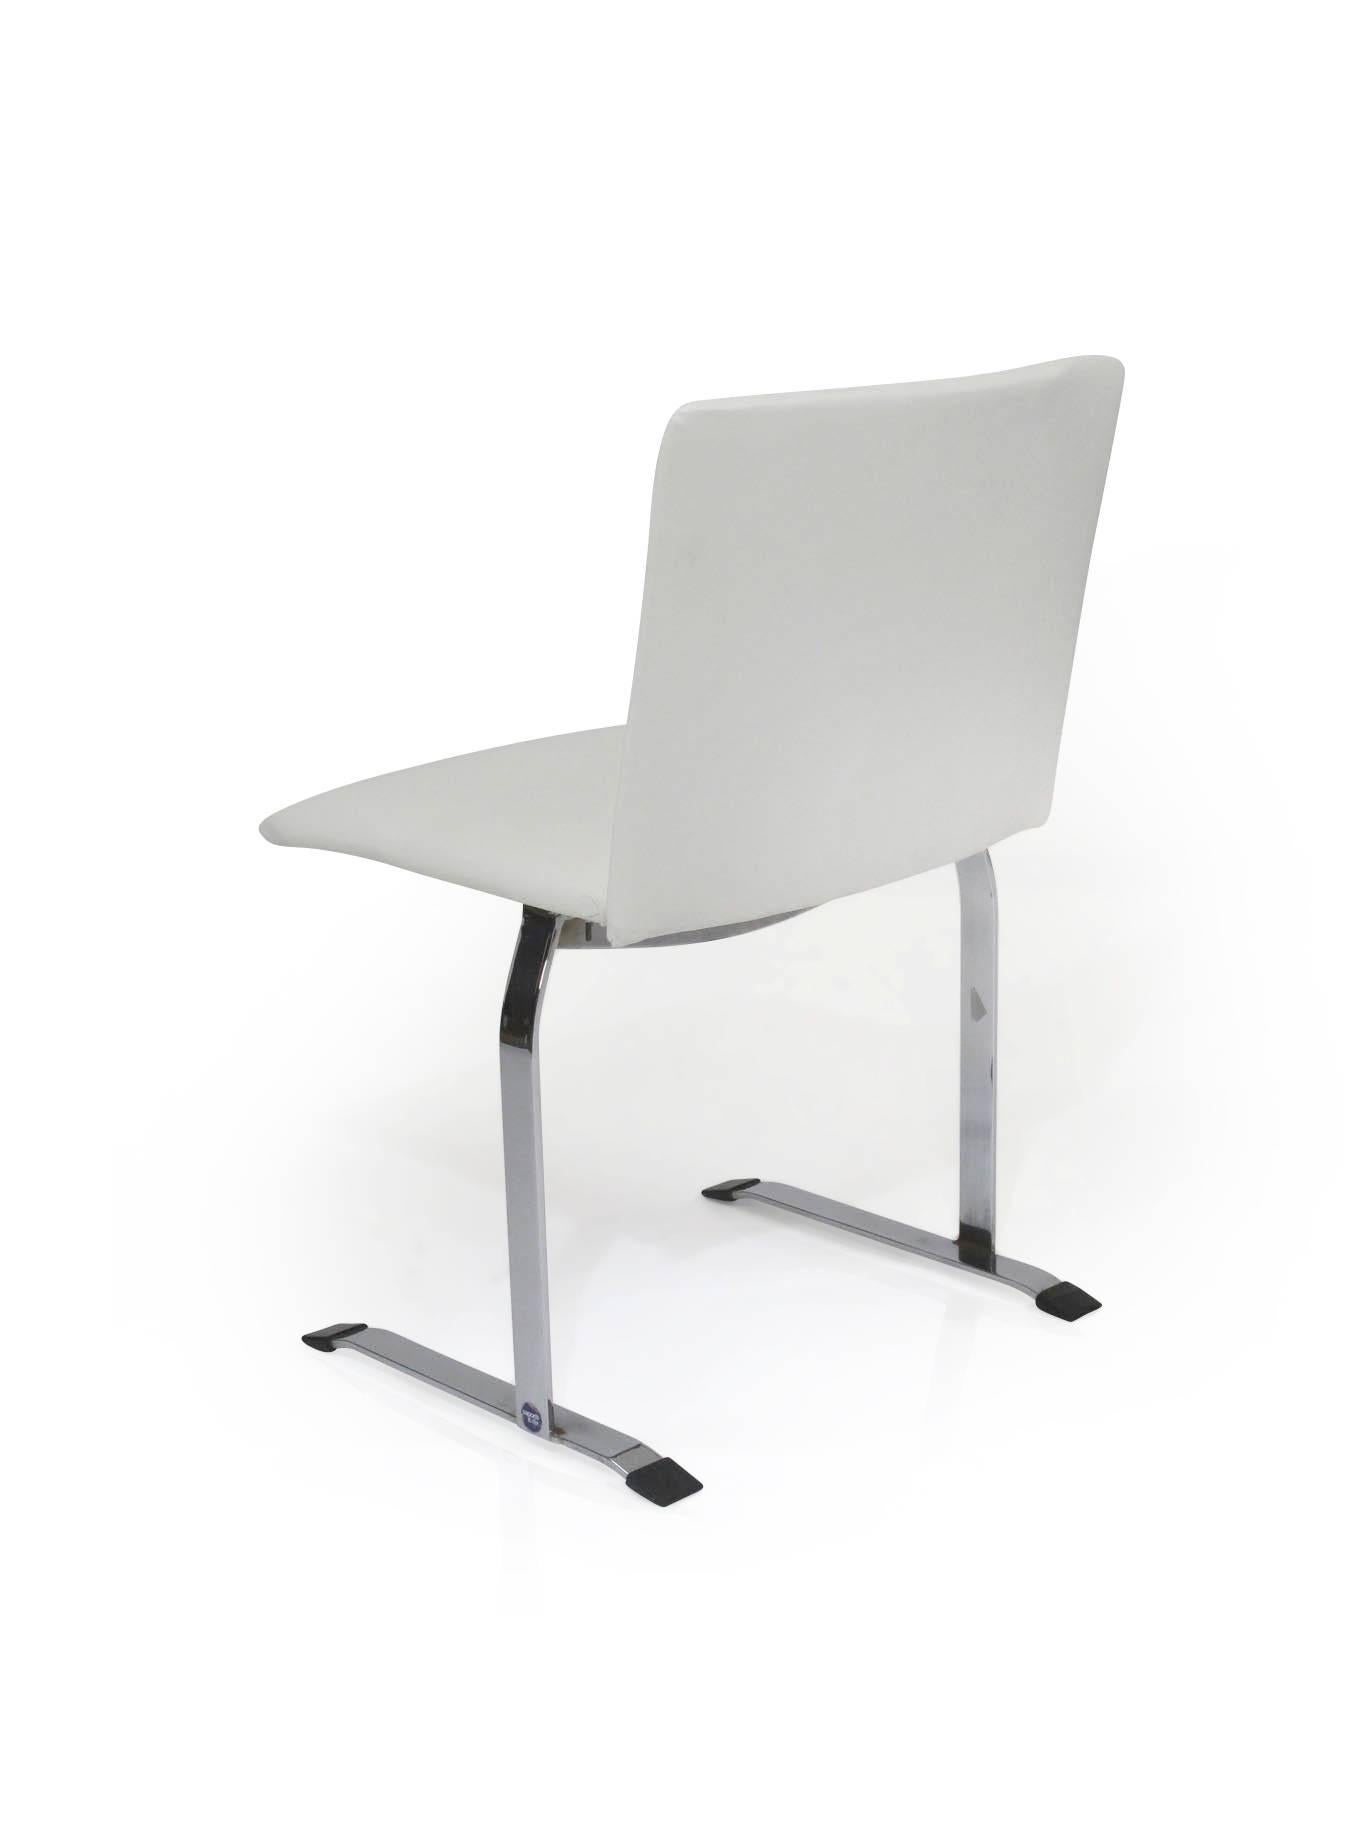 Late 20th Century Giovanni Offredi for Saporiti Dining Chairs in White Vinyl on Chrome Steel Frame